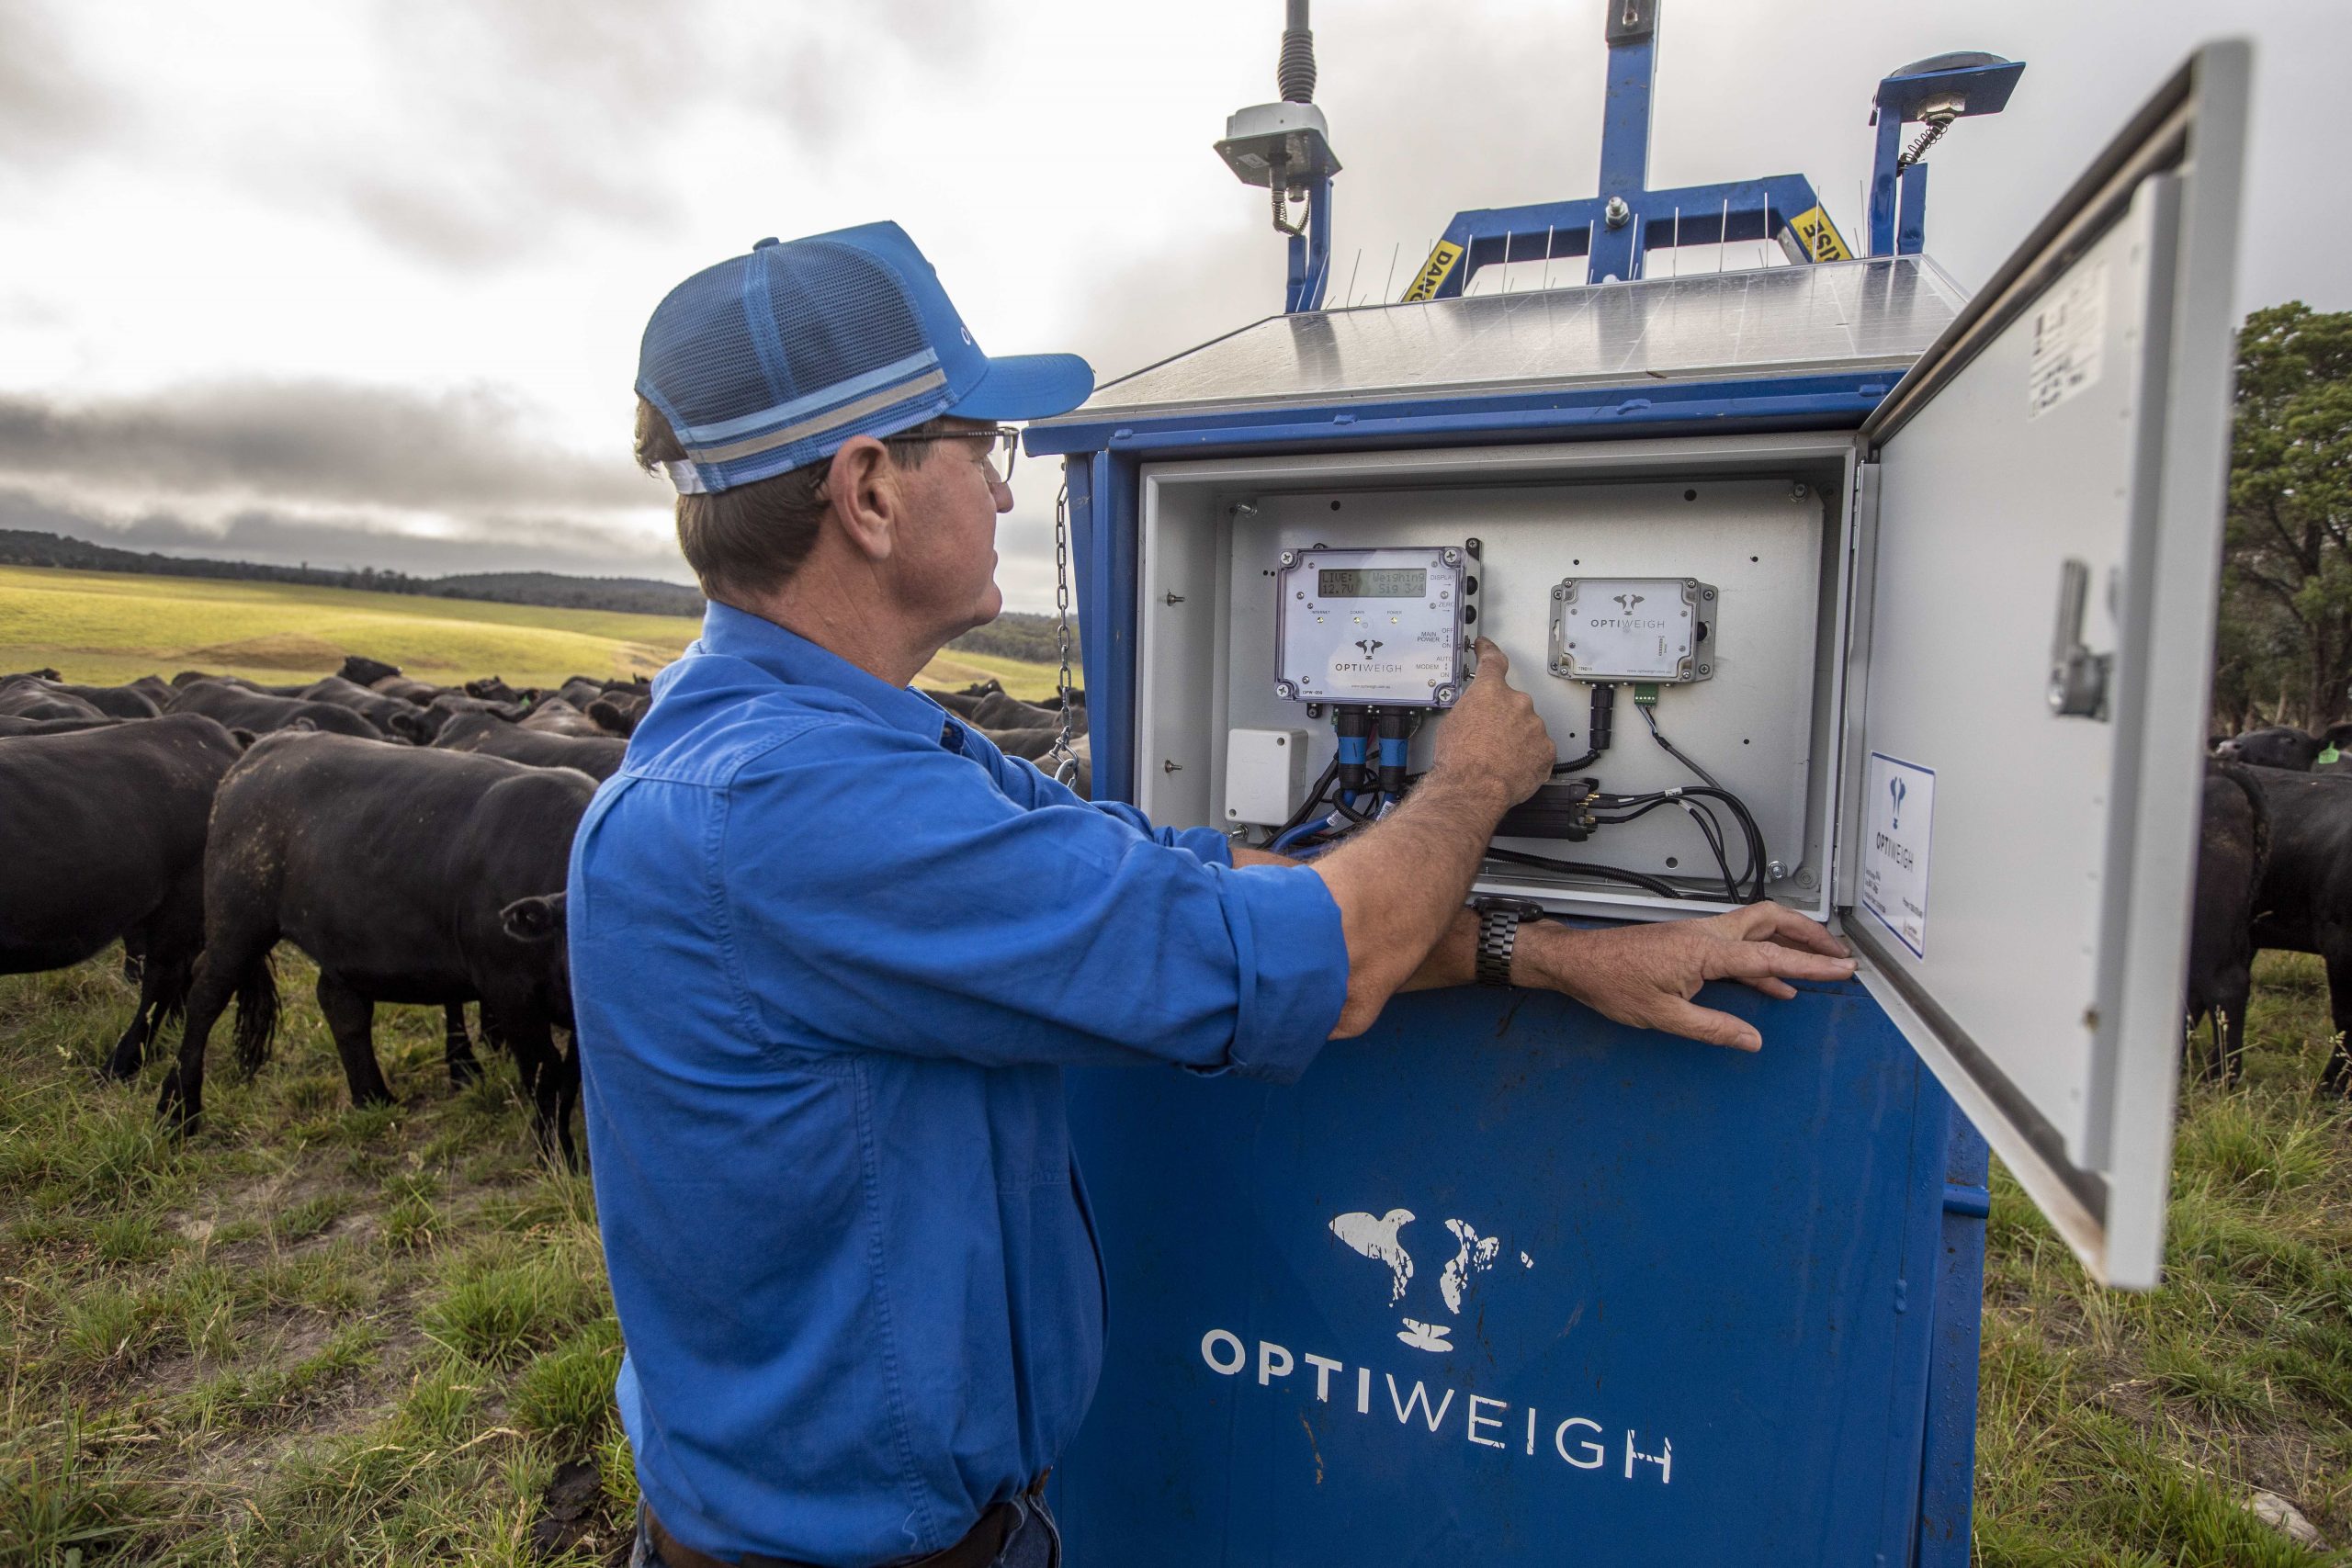 Bill Mitchell Optiweigh - Agritech (Supplied by AgriFutures Australia)